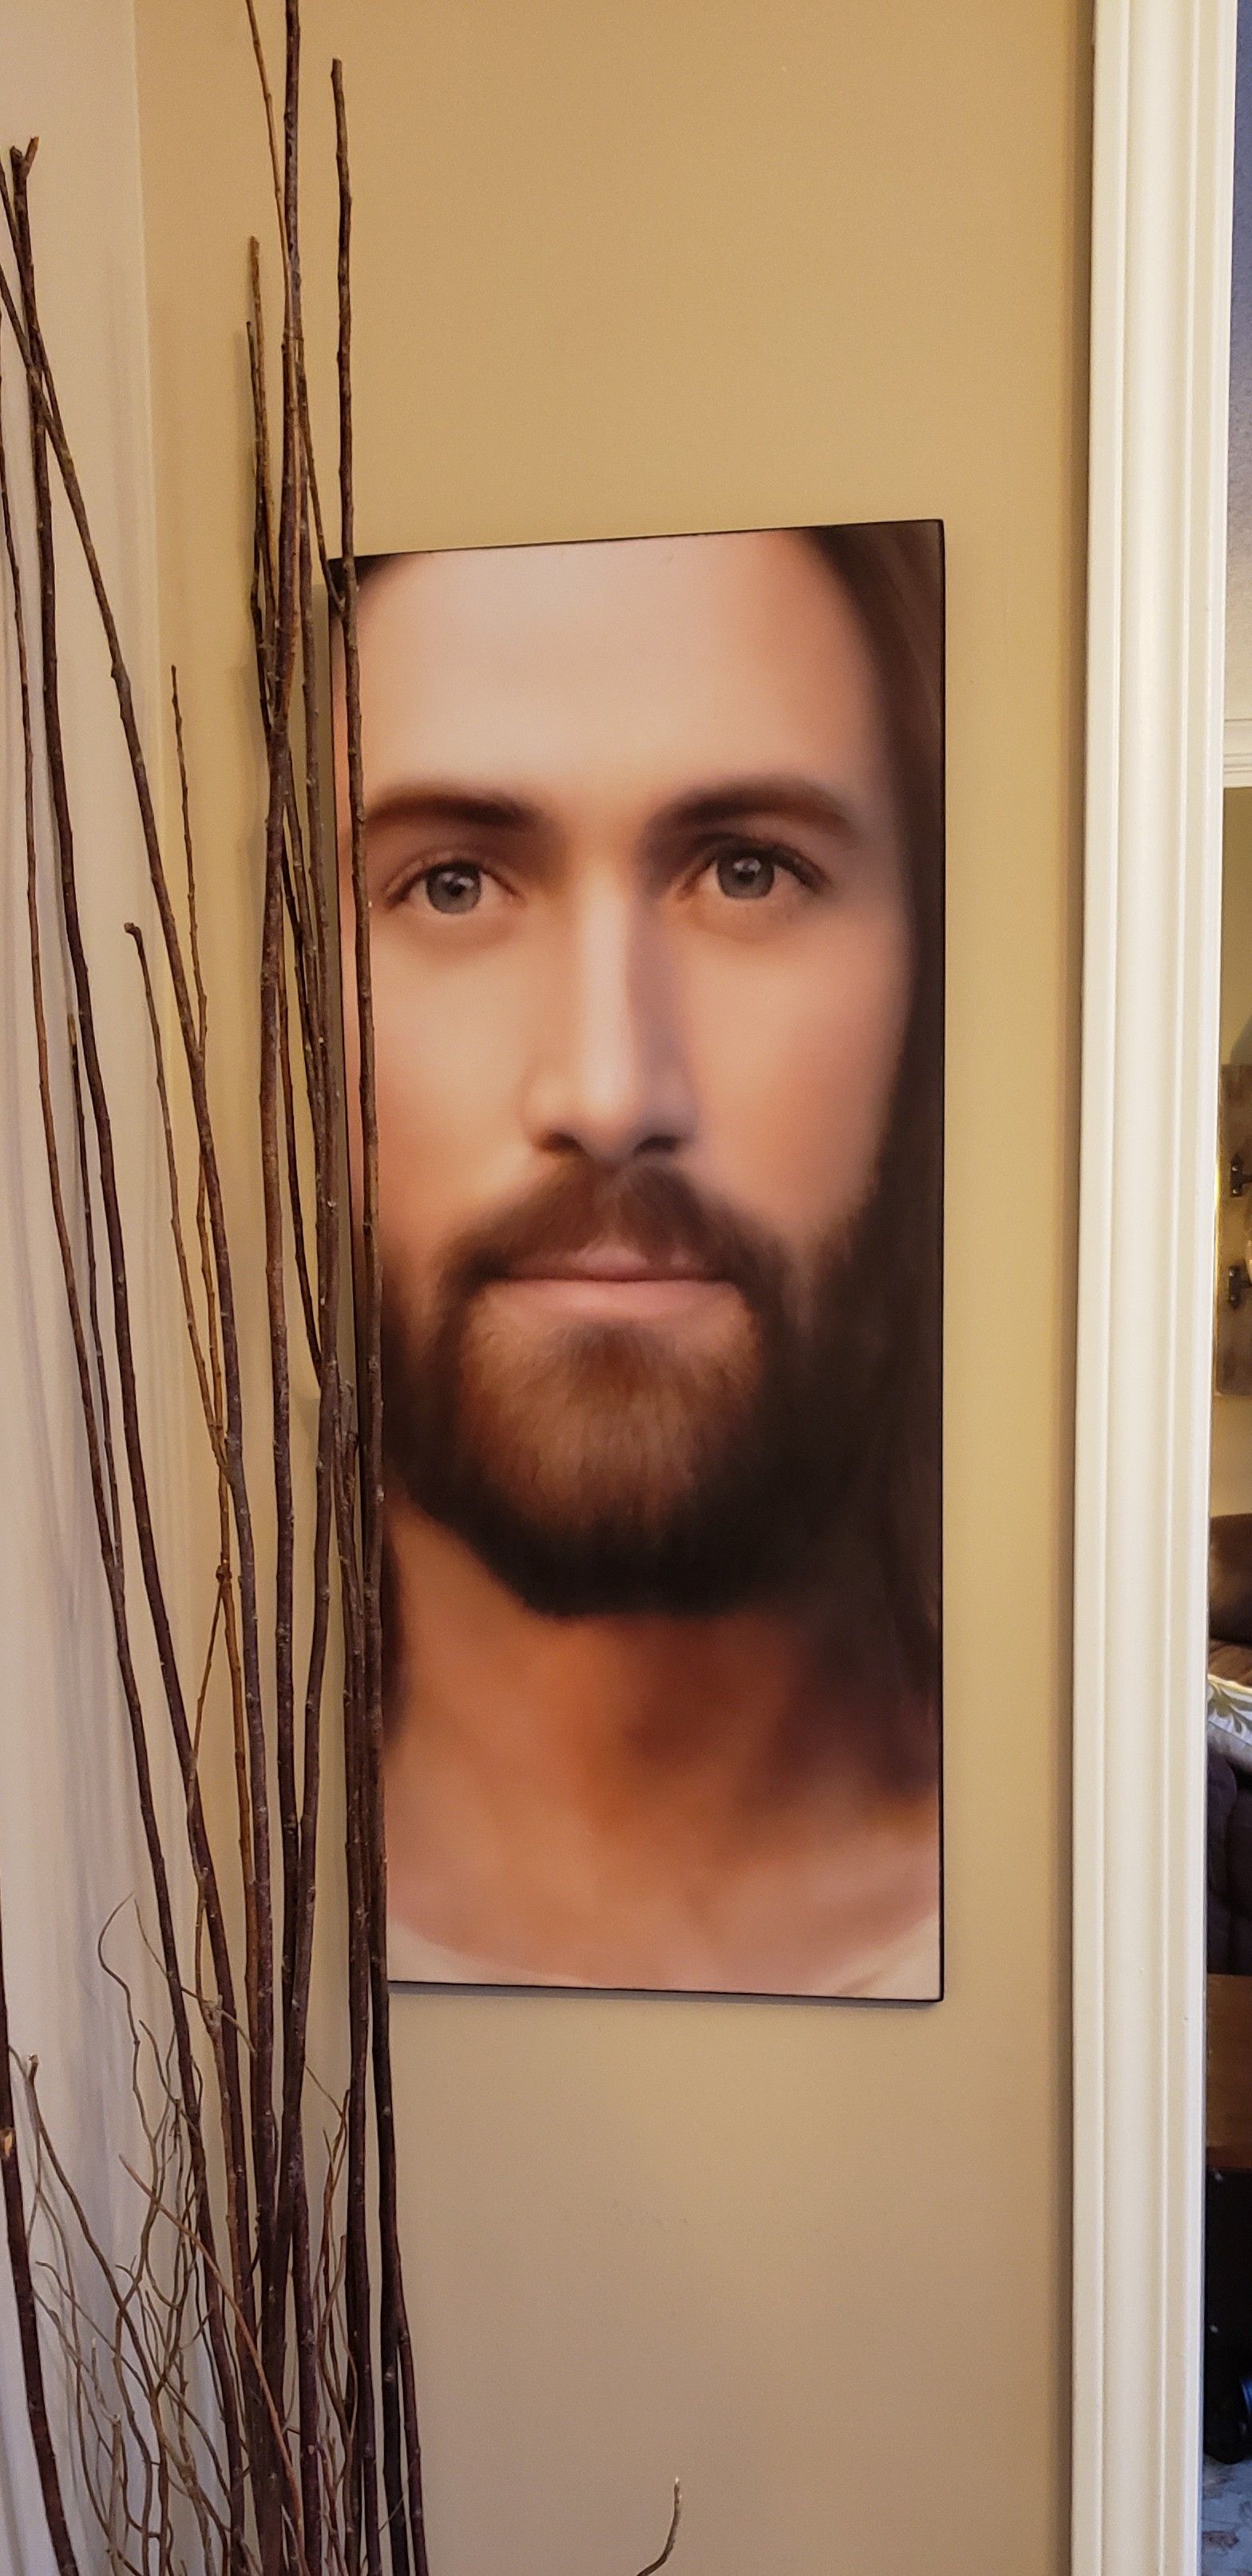 Went to a friend's house and his mom is a staunch Christian. She has a picture of Jesus up in her living room, but I thought it looked like a certain celebrity...